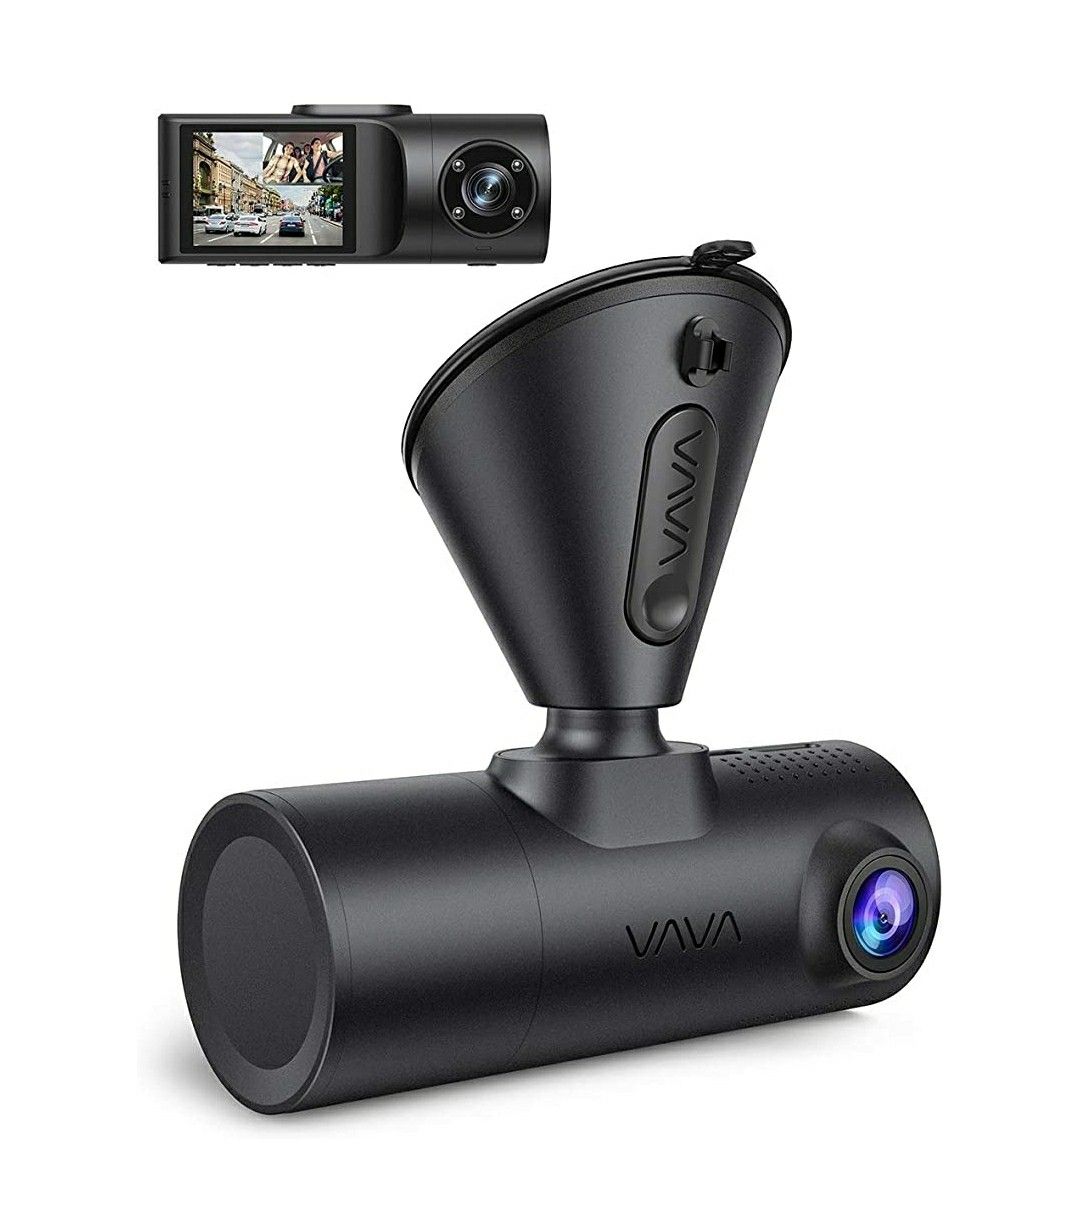 VAVA Dual Dash Cam, VAVA 2K Front and 1080P Cabin or 2.5K 30fps Single Front Car Camera, Both Sony Sensor, Infrared Night Vision, App Control